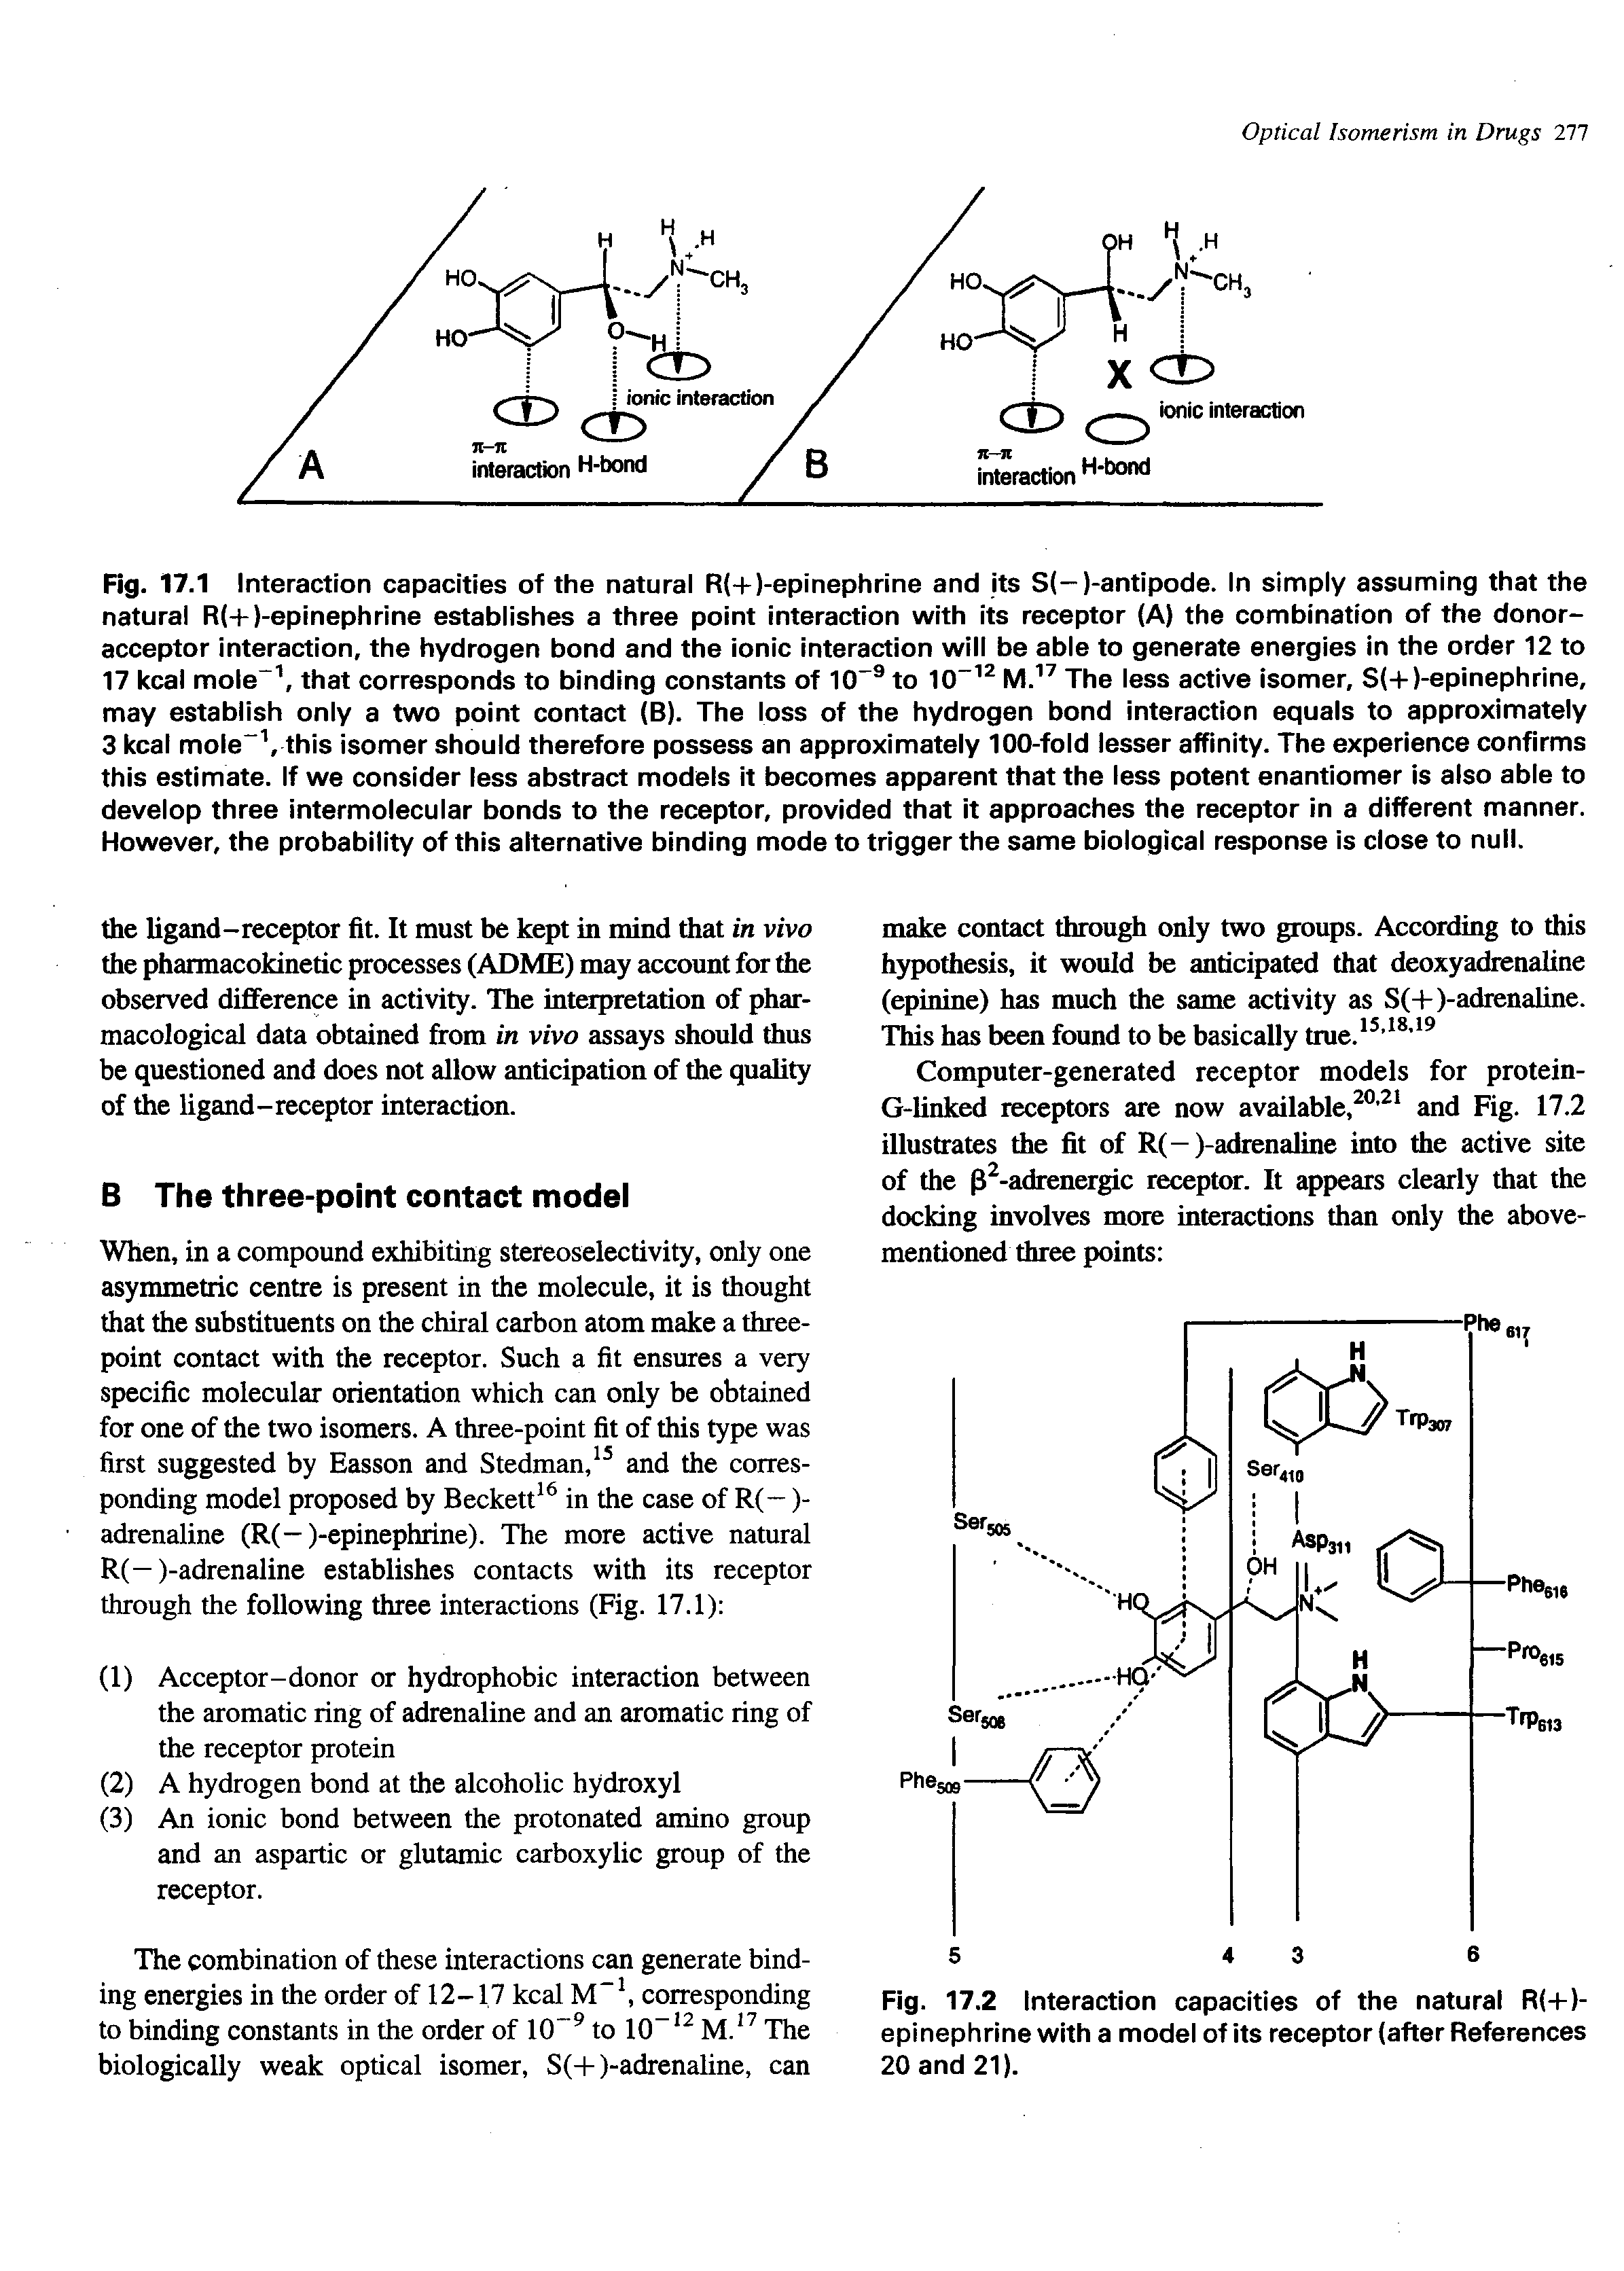 Fig. 17.1 Interaction capacities of the natural R +)-epinephrine and its S(-)-antipode. In simply assuming that the natural R(+)-epinephrine establishes a three point interaction with its receptor (A) the combination of the donor-acceptor interaction, the hydrogen bond and the ionic interaction will be able to generate energies in the order 12 to 17 kcal mole that corresponds to binding constants of 10 to 10 The less active isomer, S(+)-epinephrine, may establish only a two point contact (B). The loss of the hydrogen bond interaction equals to approximately 3 kcal mole this isomer should therefore possess an approximately 100-fold lesser affinity. The experience confirms this estimate. If we consider less abstract models it becomes apparent that the less potent enantiomer is also able to develop three intermolecular bonds to the receptor, provided that it approaches the receptor in a different manner. However, the probability of this alternative binding mode to trigger the same biological response is close to null.